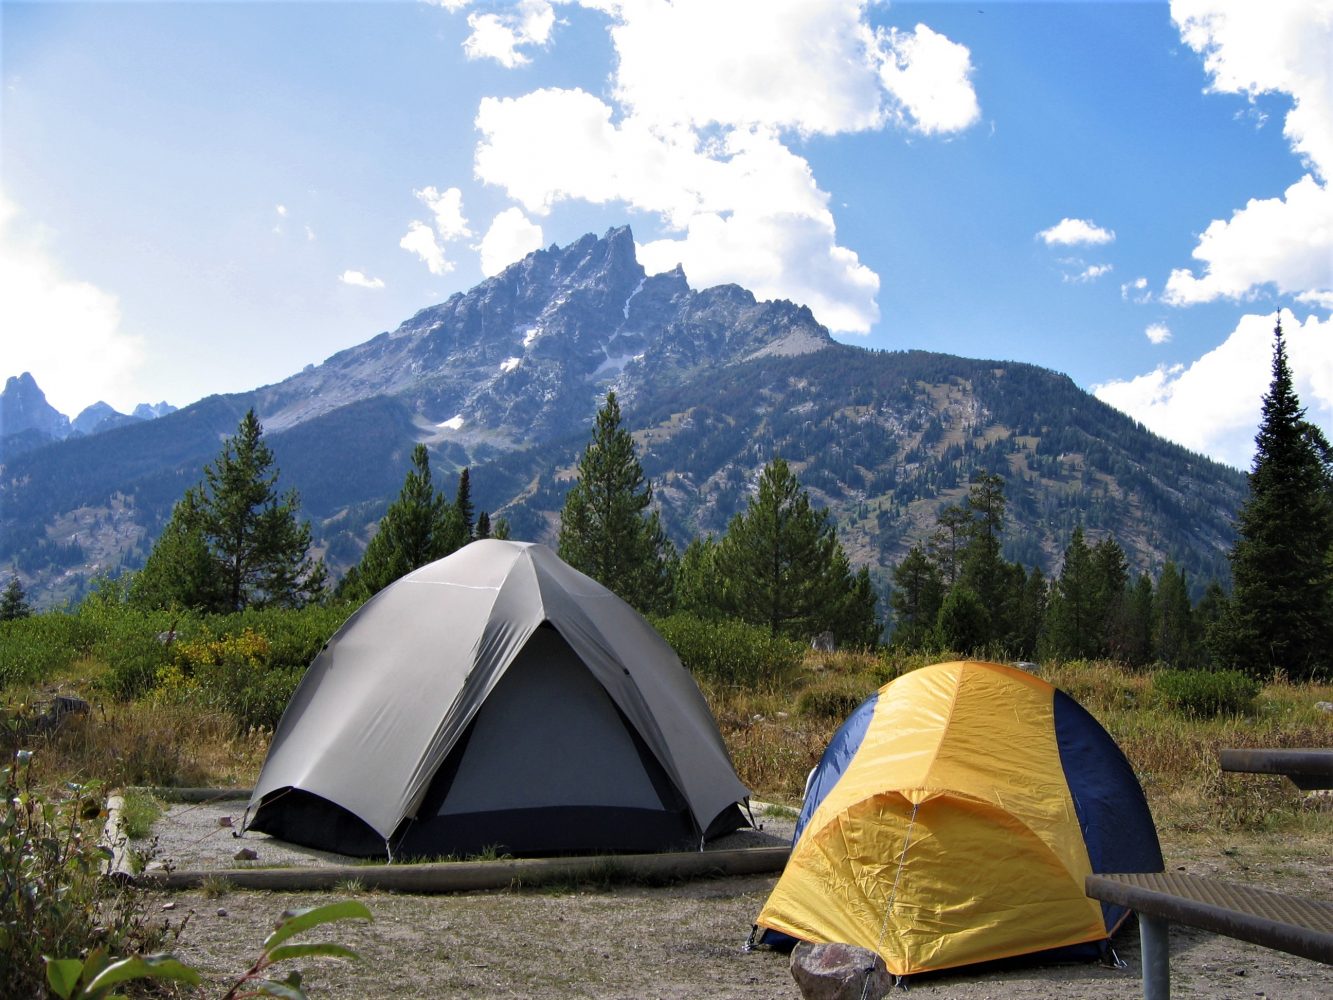 Camping and Hiking gear rentals